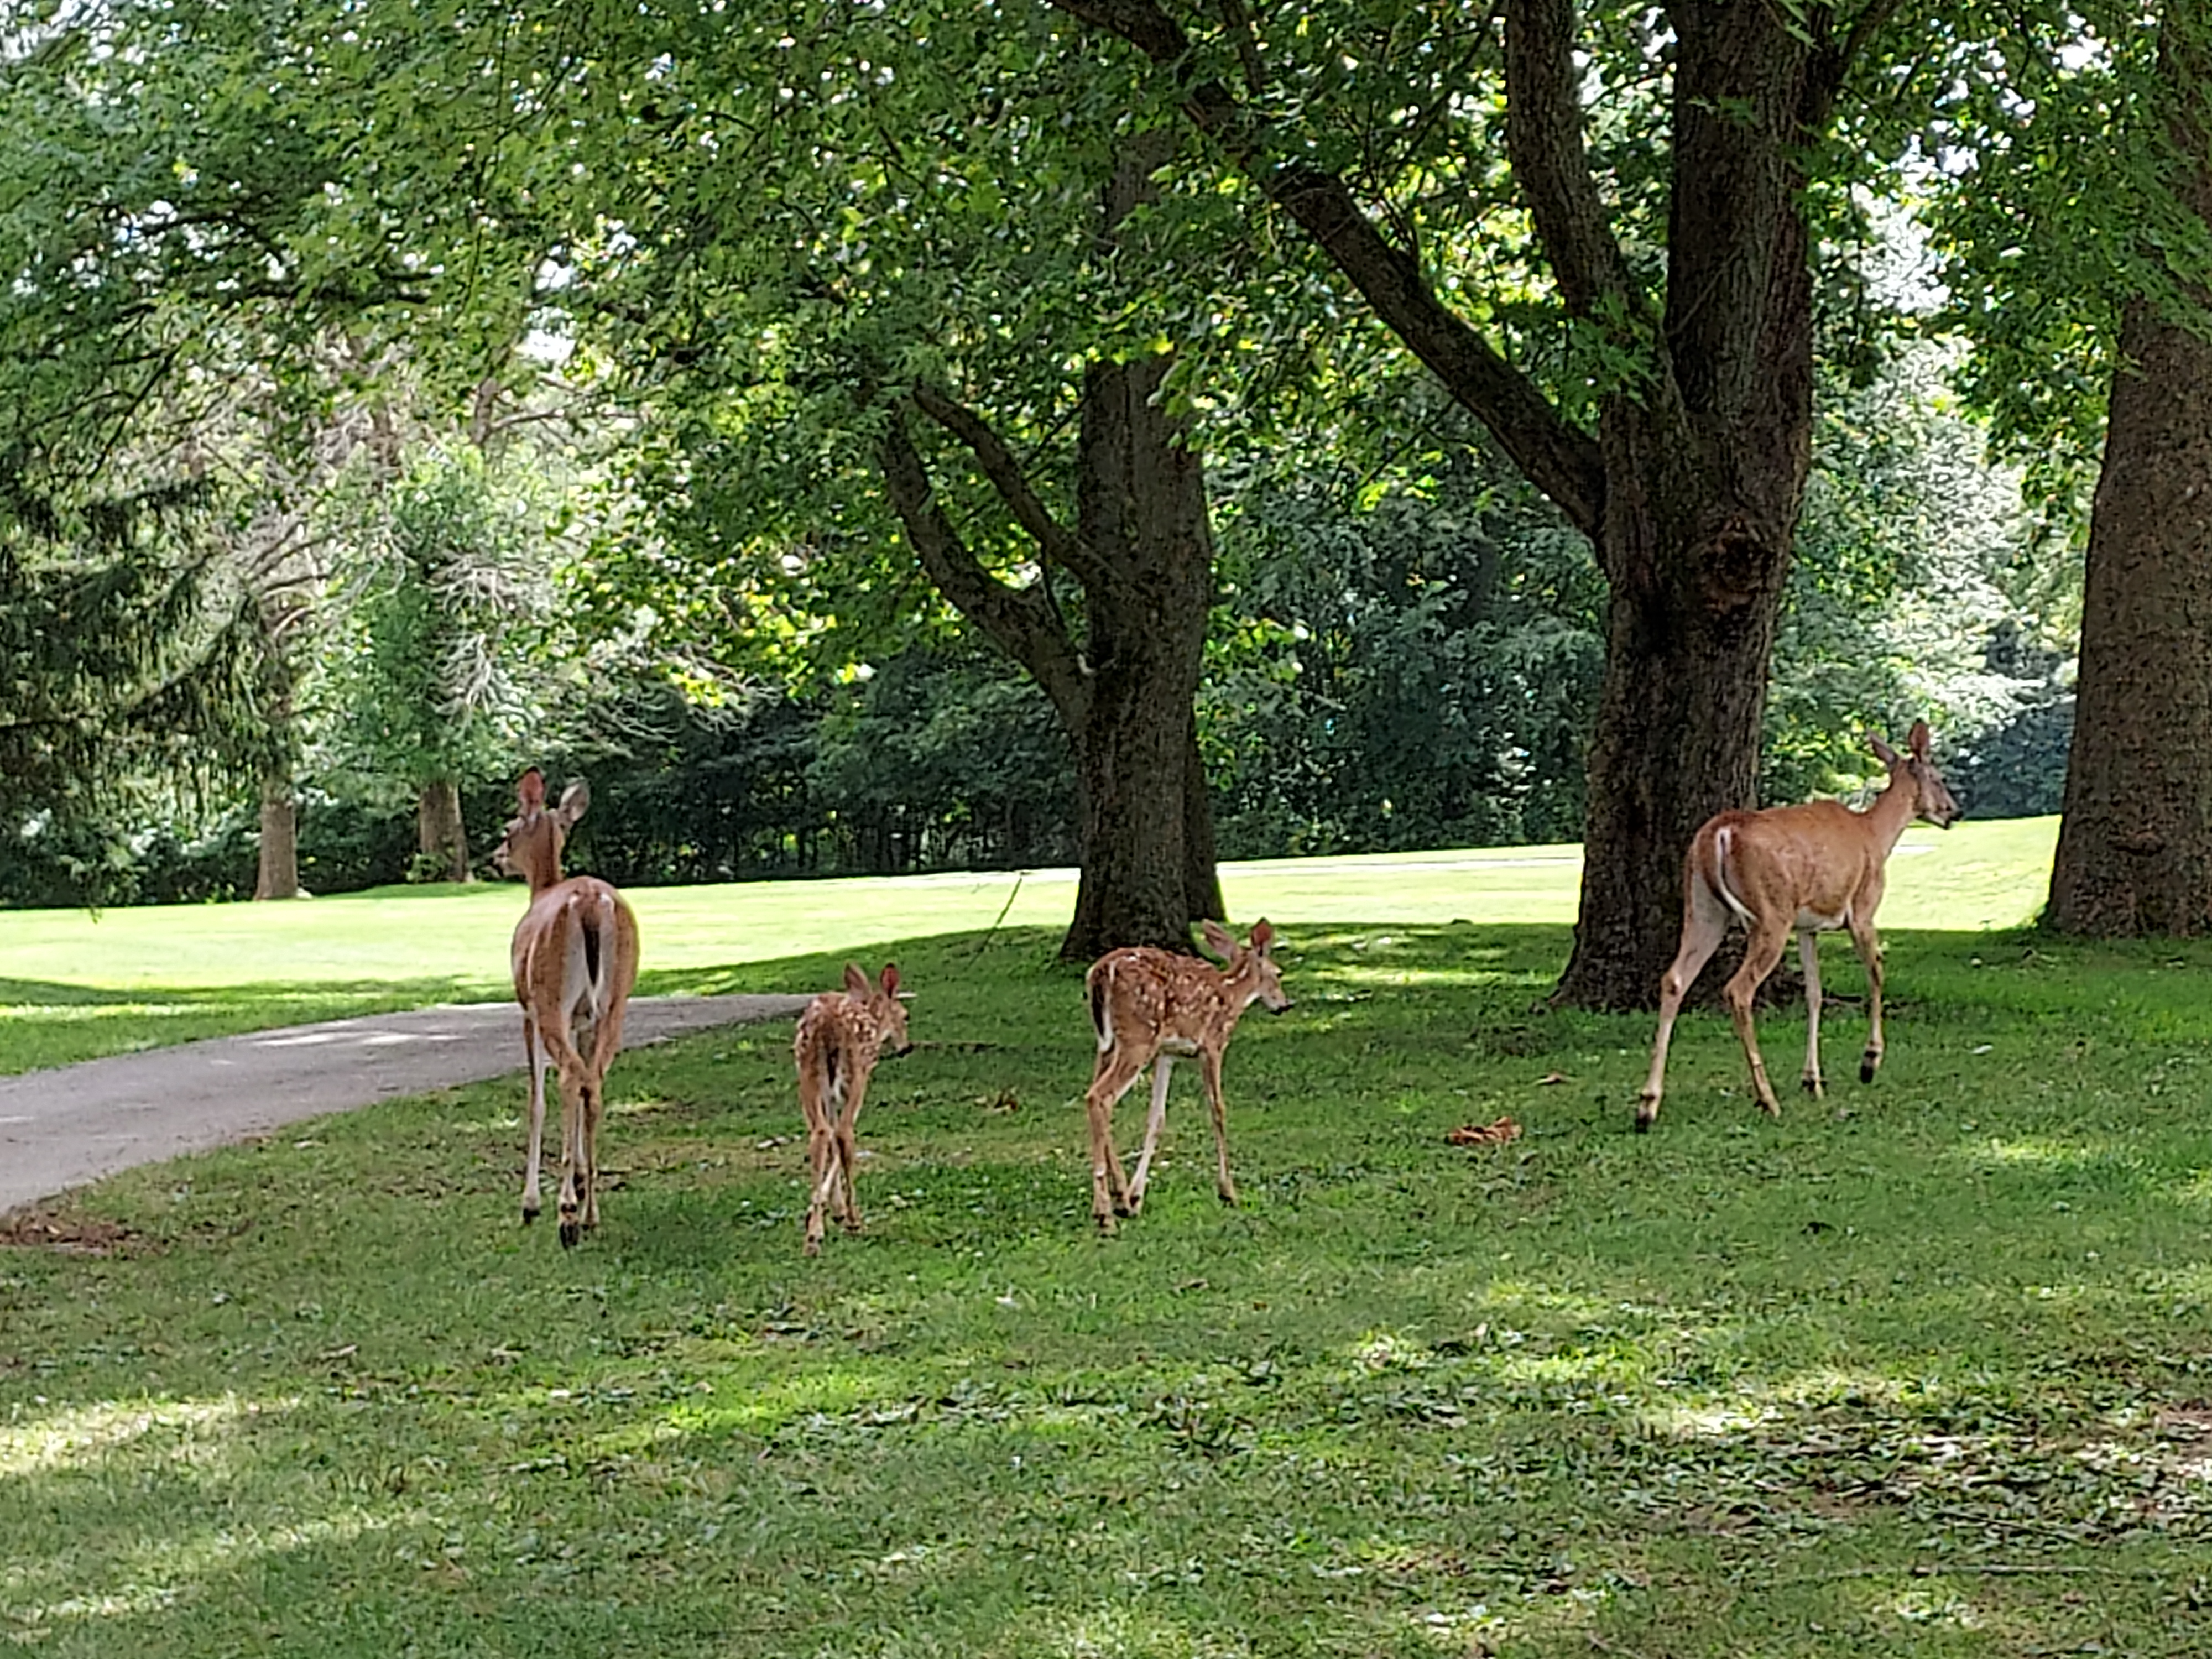 Oh deer, a different kind of foursome